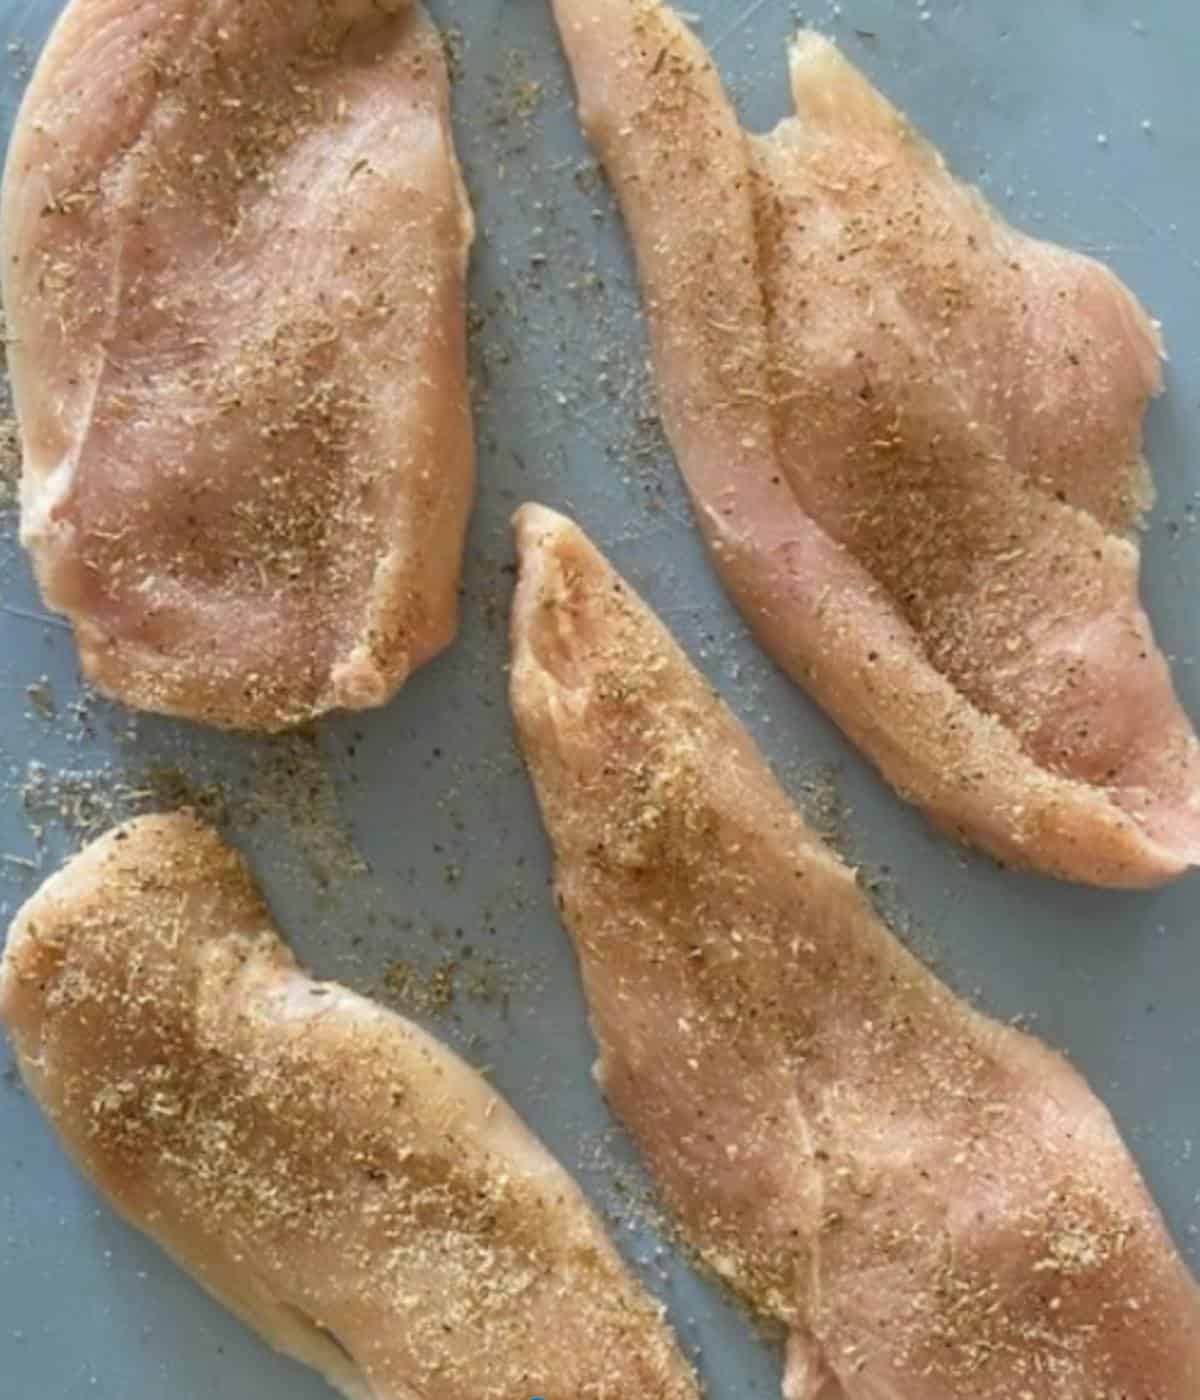 Chicken breast sliced into thin breasts and seasoned.